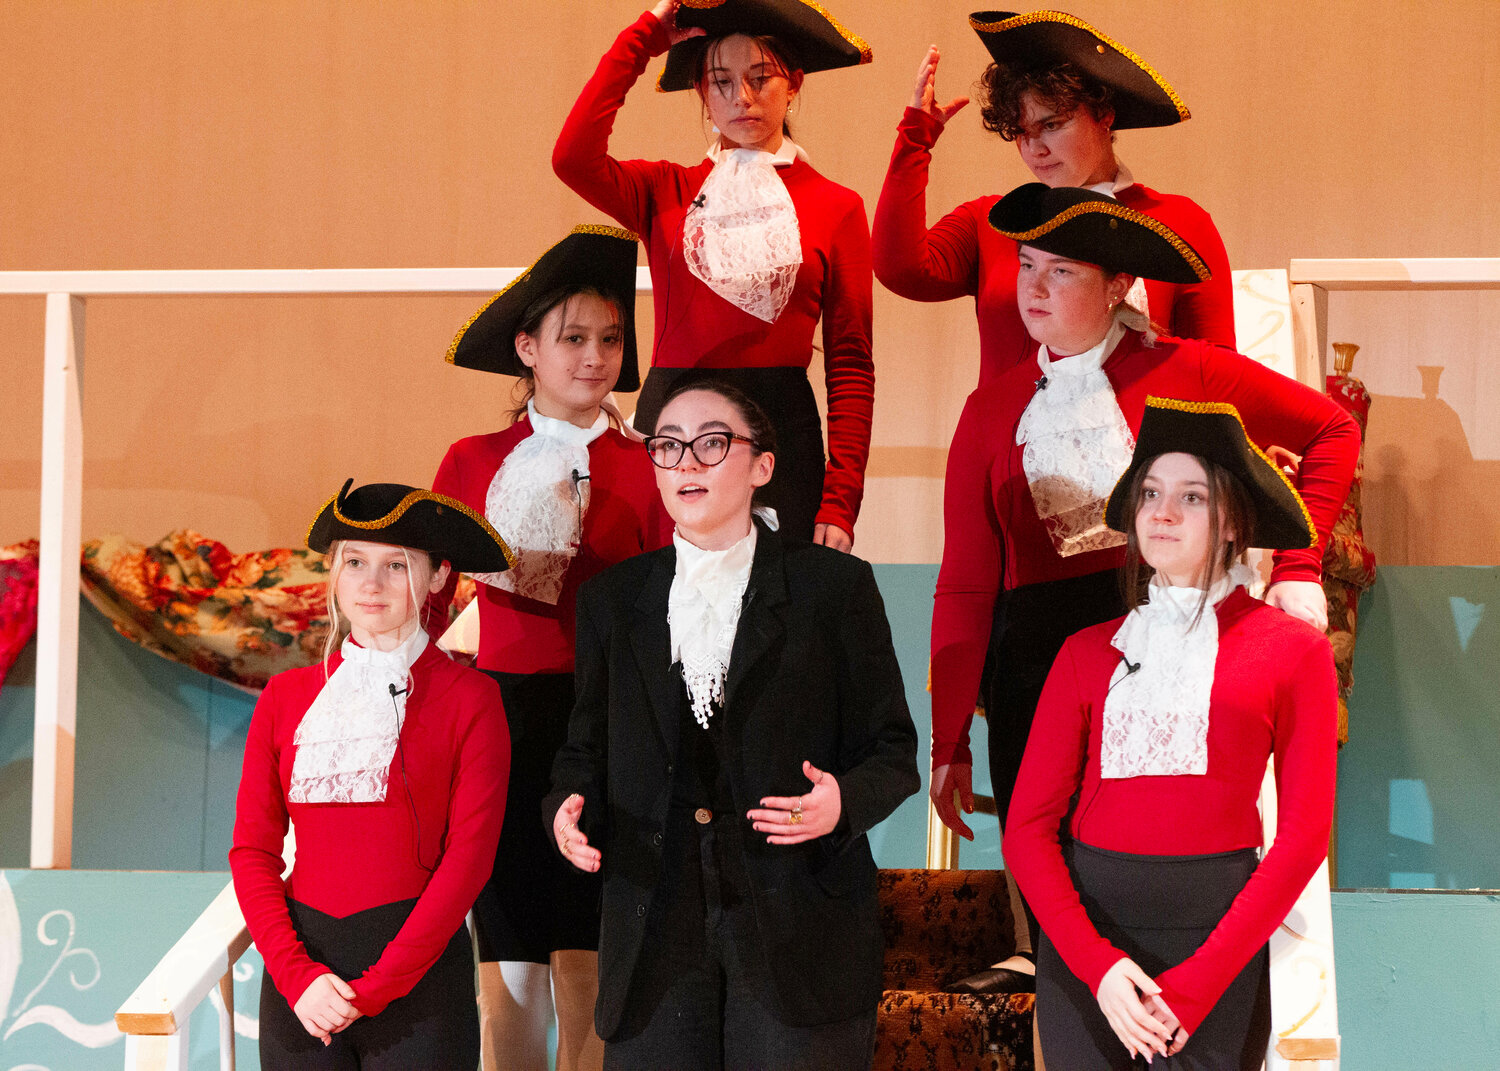 Theresa Katin (center), playing Antonio Salieri, is surrounded by citizens of Vienna played by (clockwise from lower left) Fiona Sarro, Olivia MacPhee, McKenzie Loyola, Elizabeth Viveiros, Julia Victor, and Kaylee Hagerty.